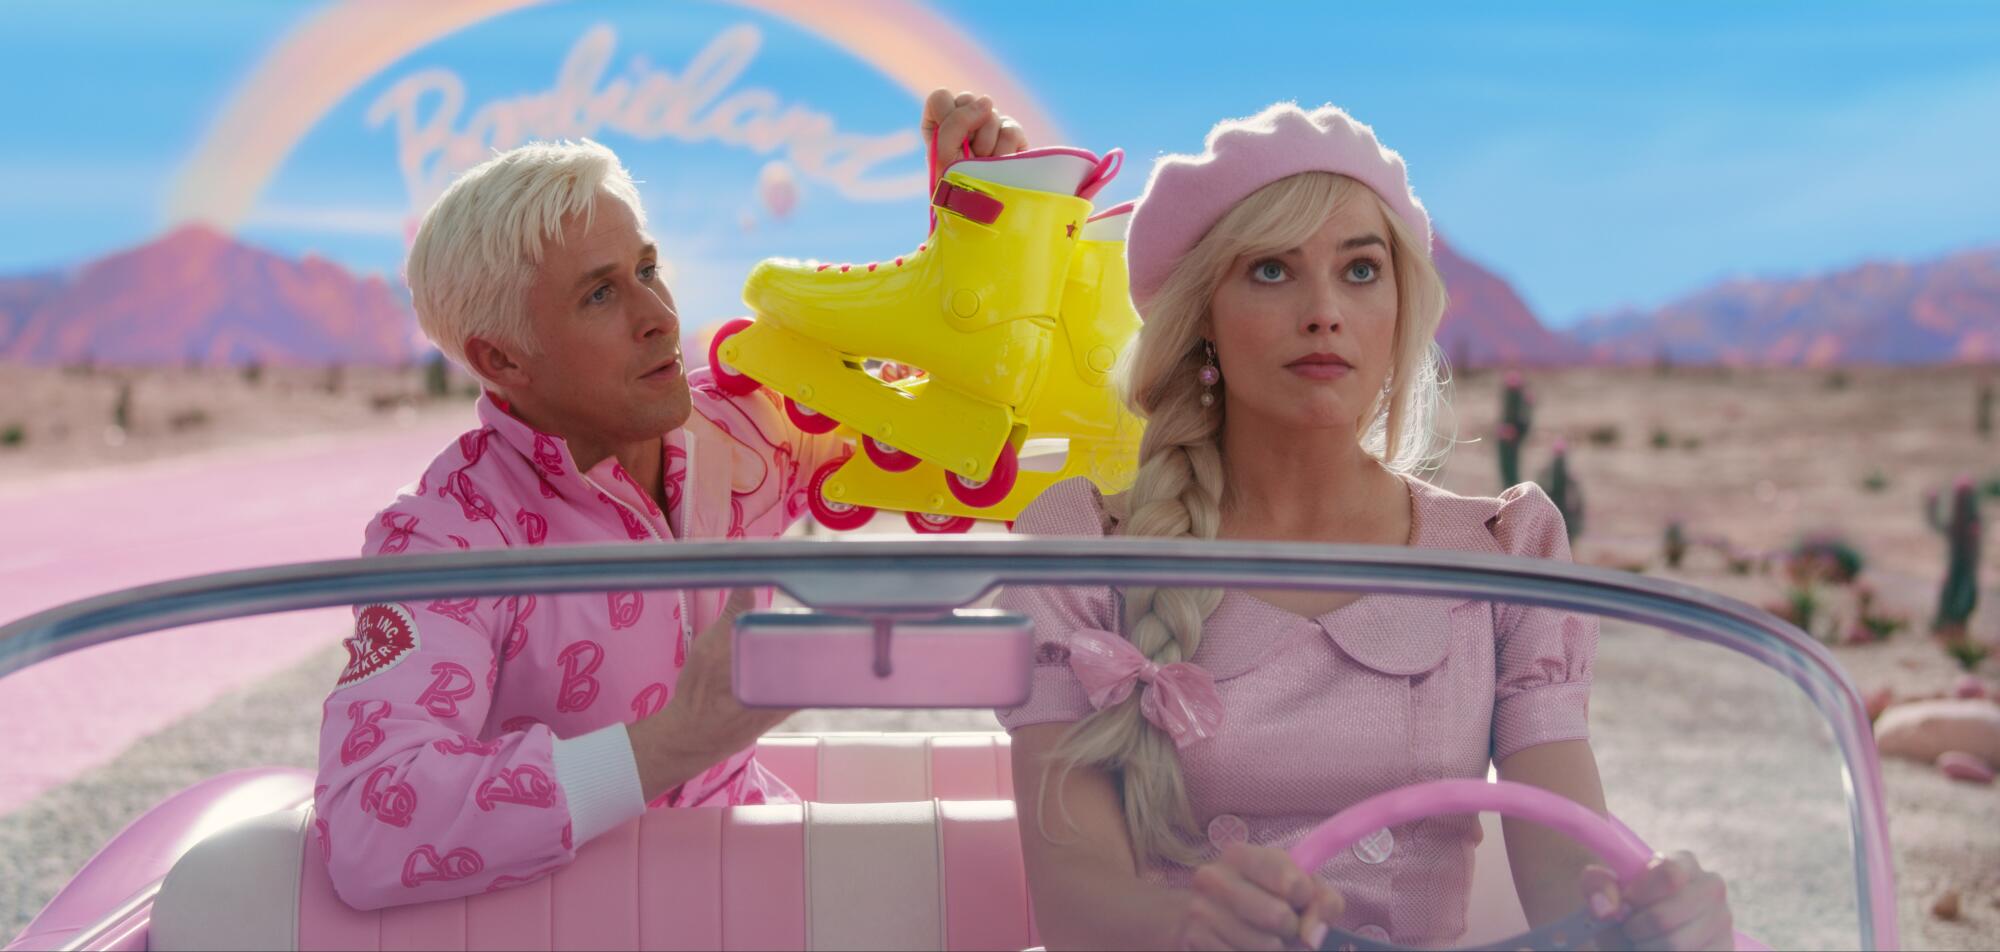 Ryan Gosling and Margot Robbie drive through the desert in a pink convertible in "Barbie."